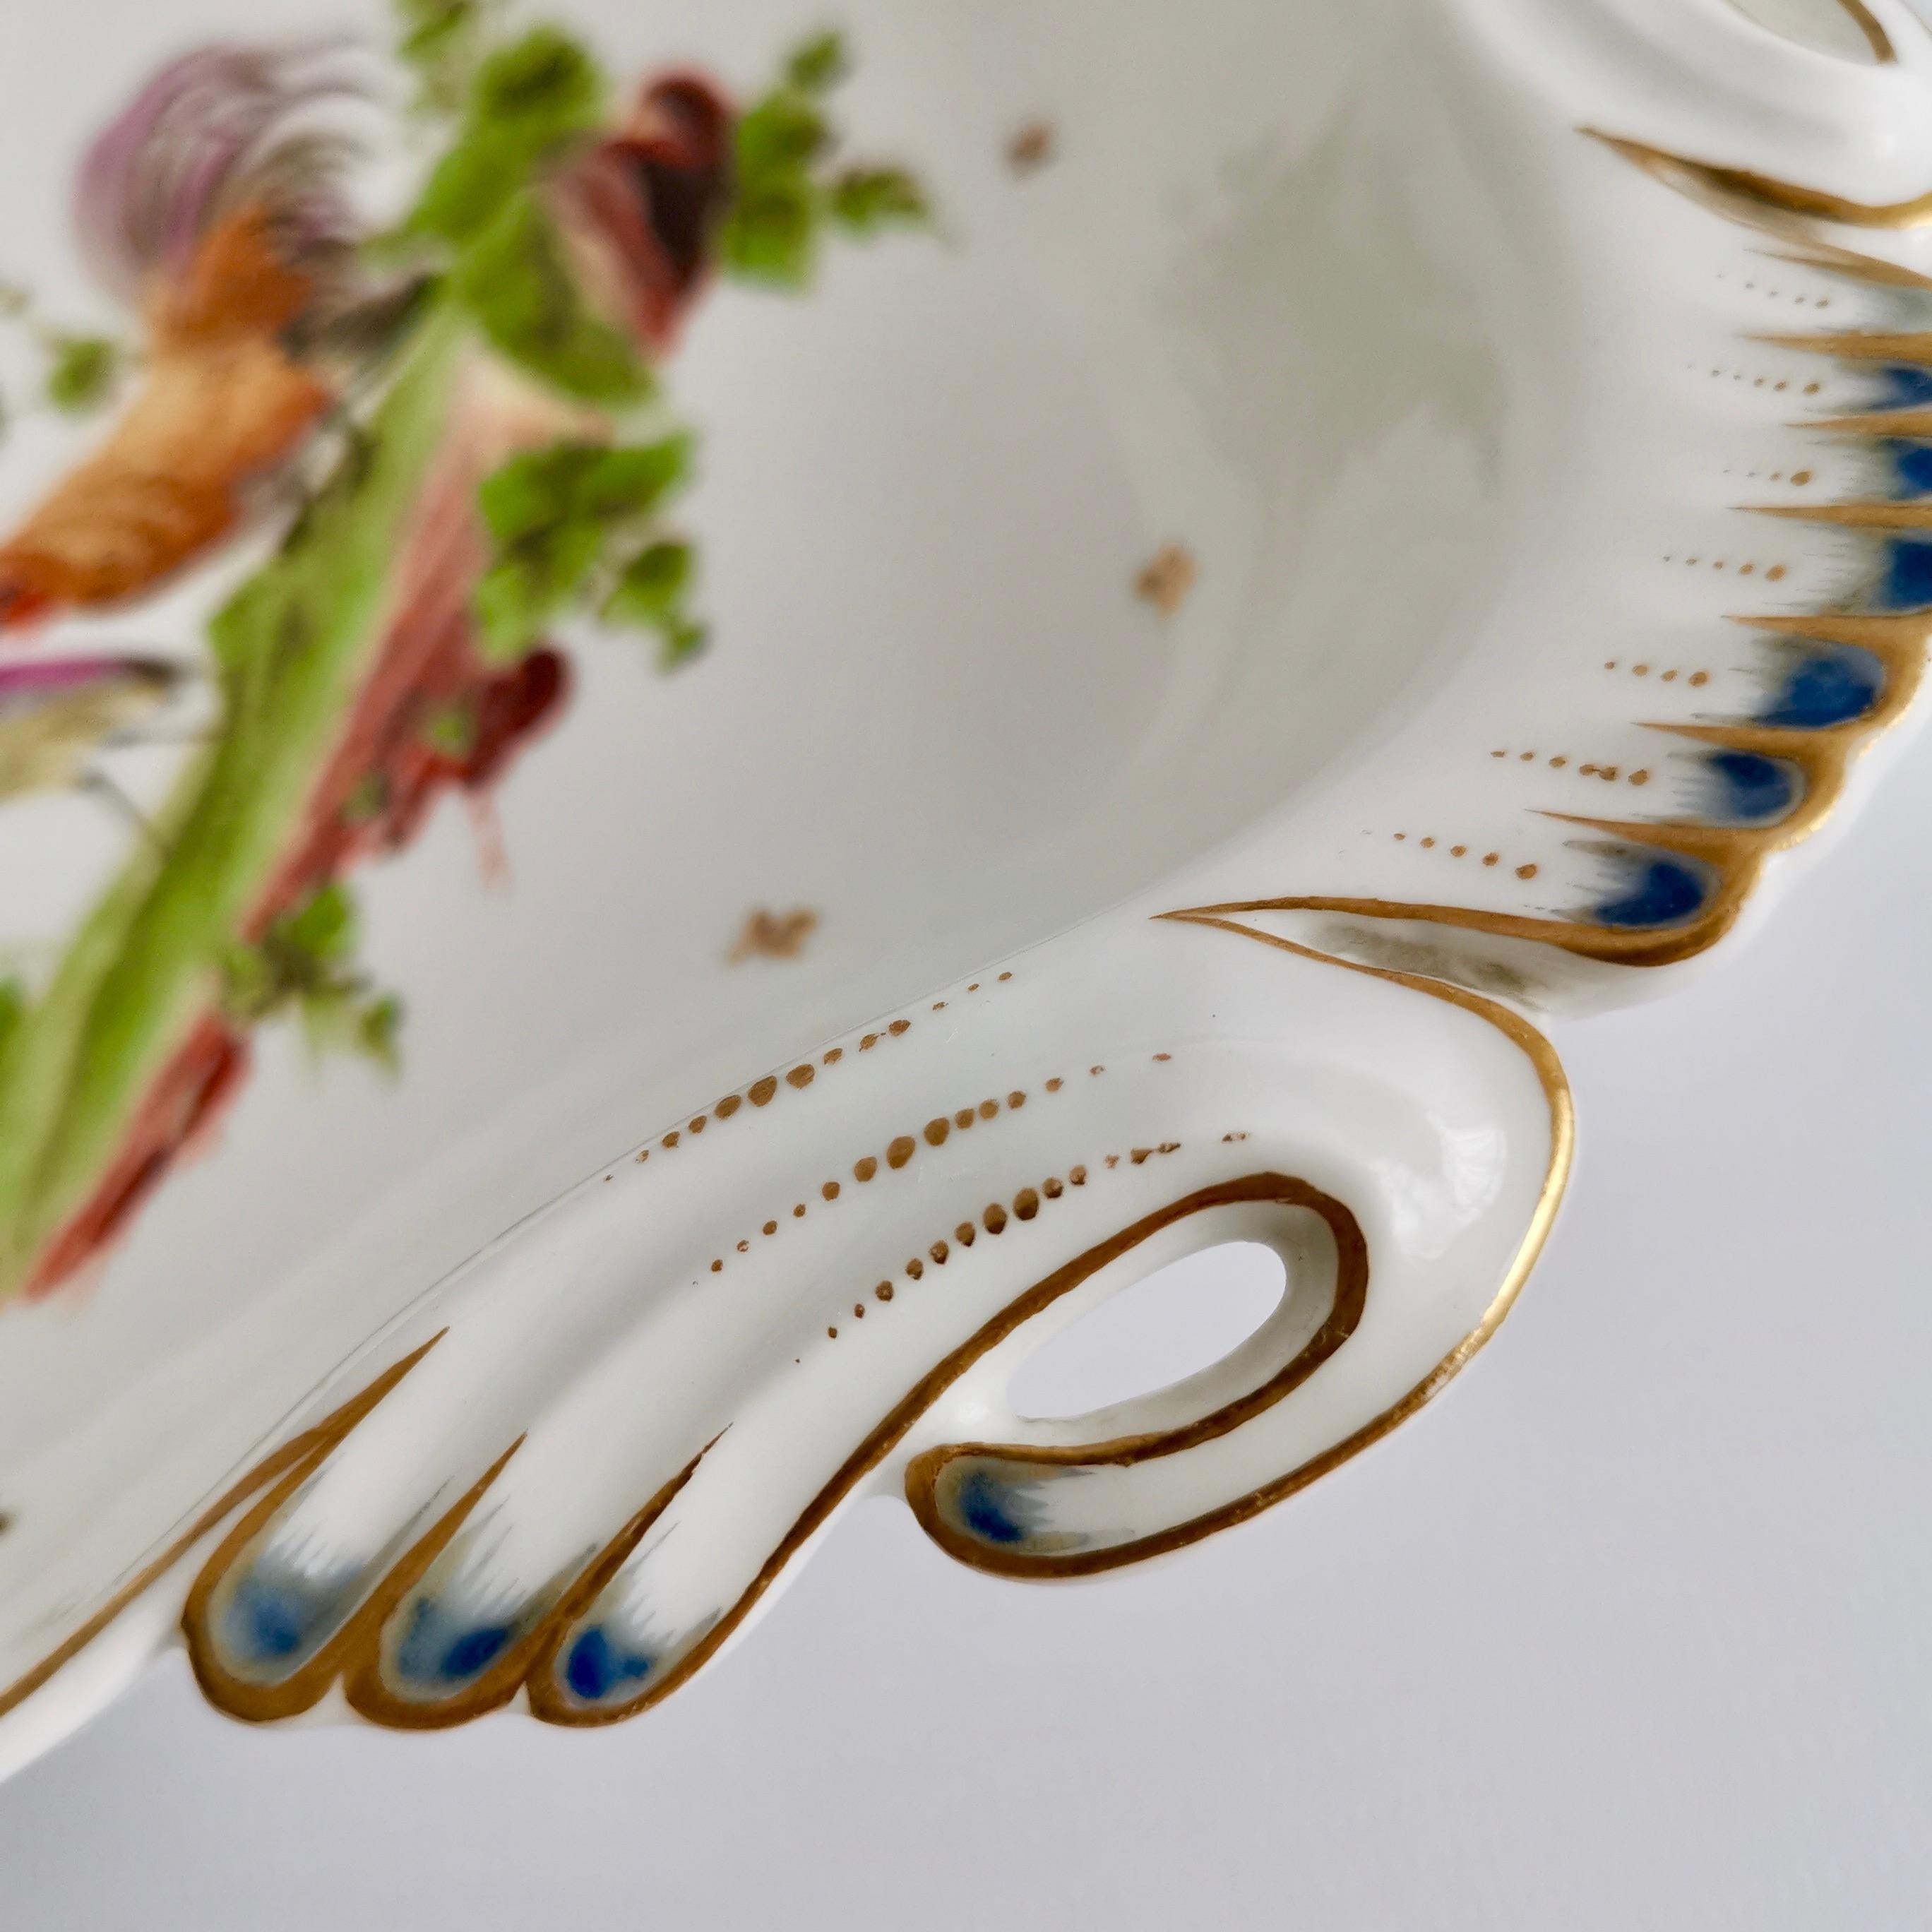 Hand-Painted French Porcelain Serving Dish, Heron and Cockerel La Fontaine, circa 1820 For Sale